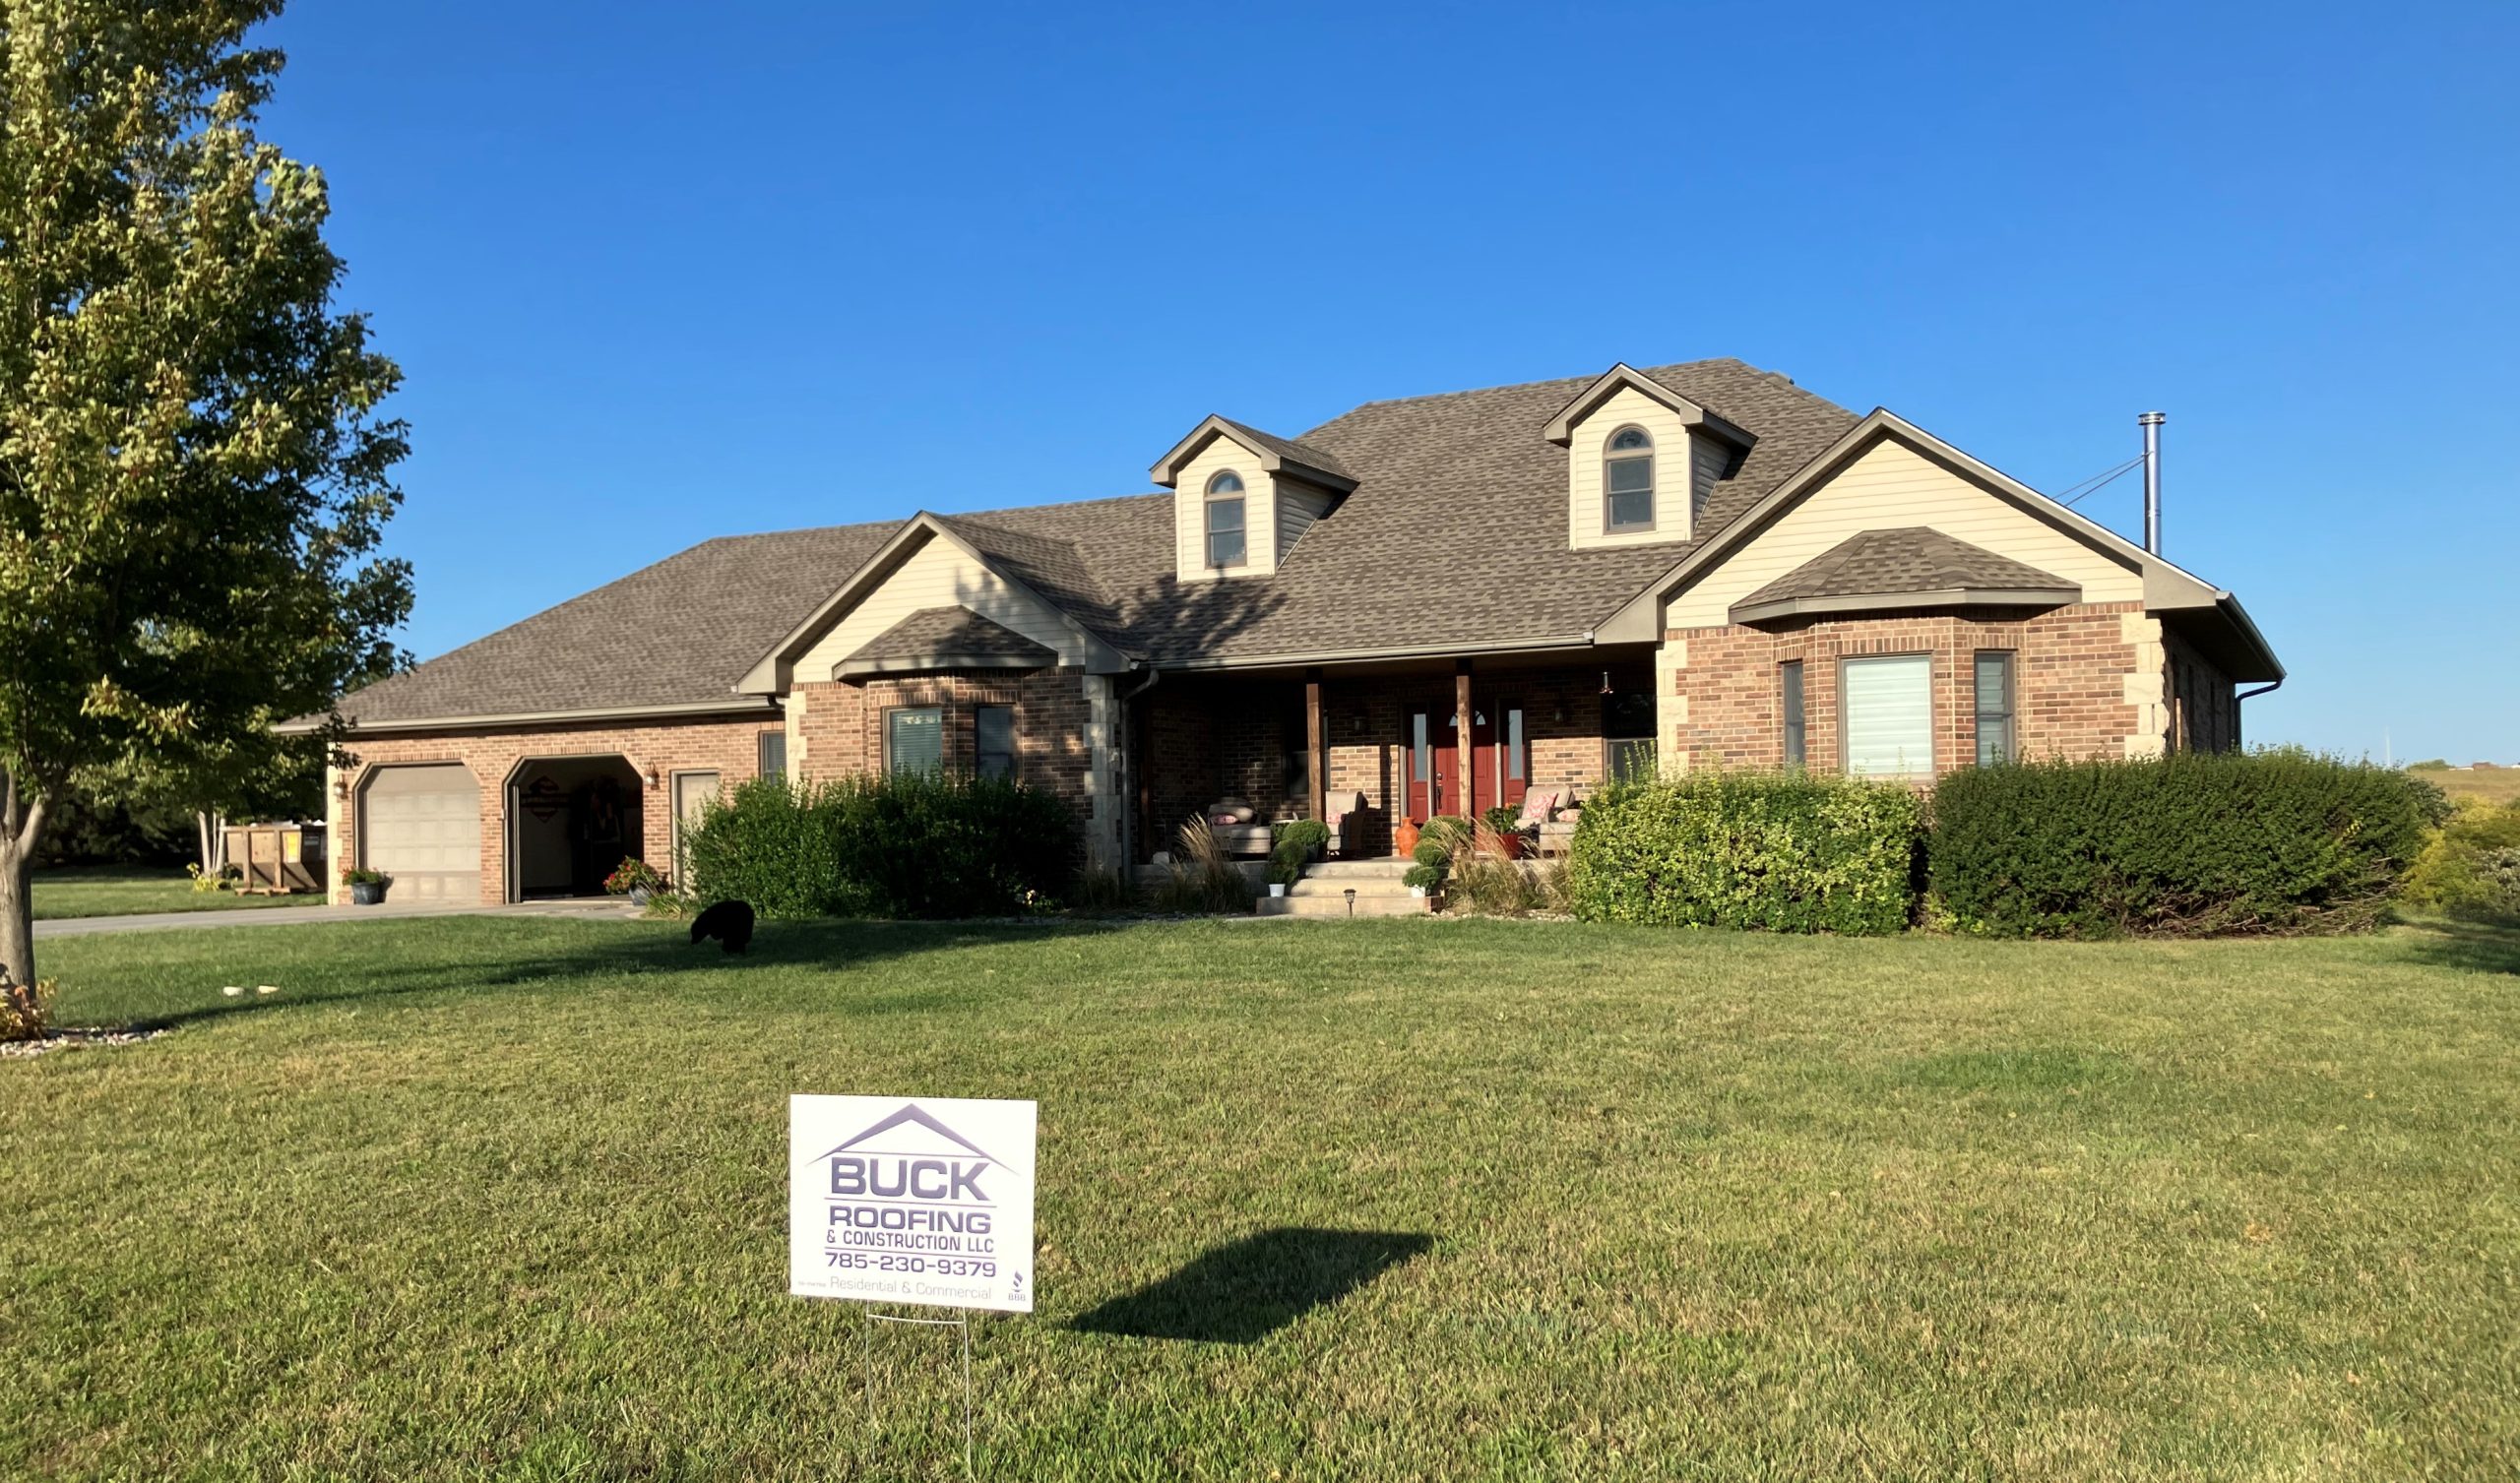 Buck Roofing fixes and replaces roofs for homes throughout Kansas and Missouri